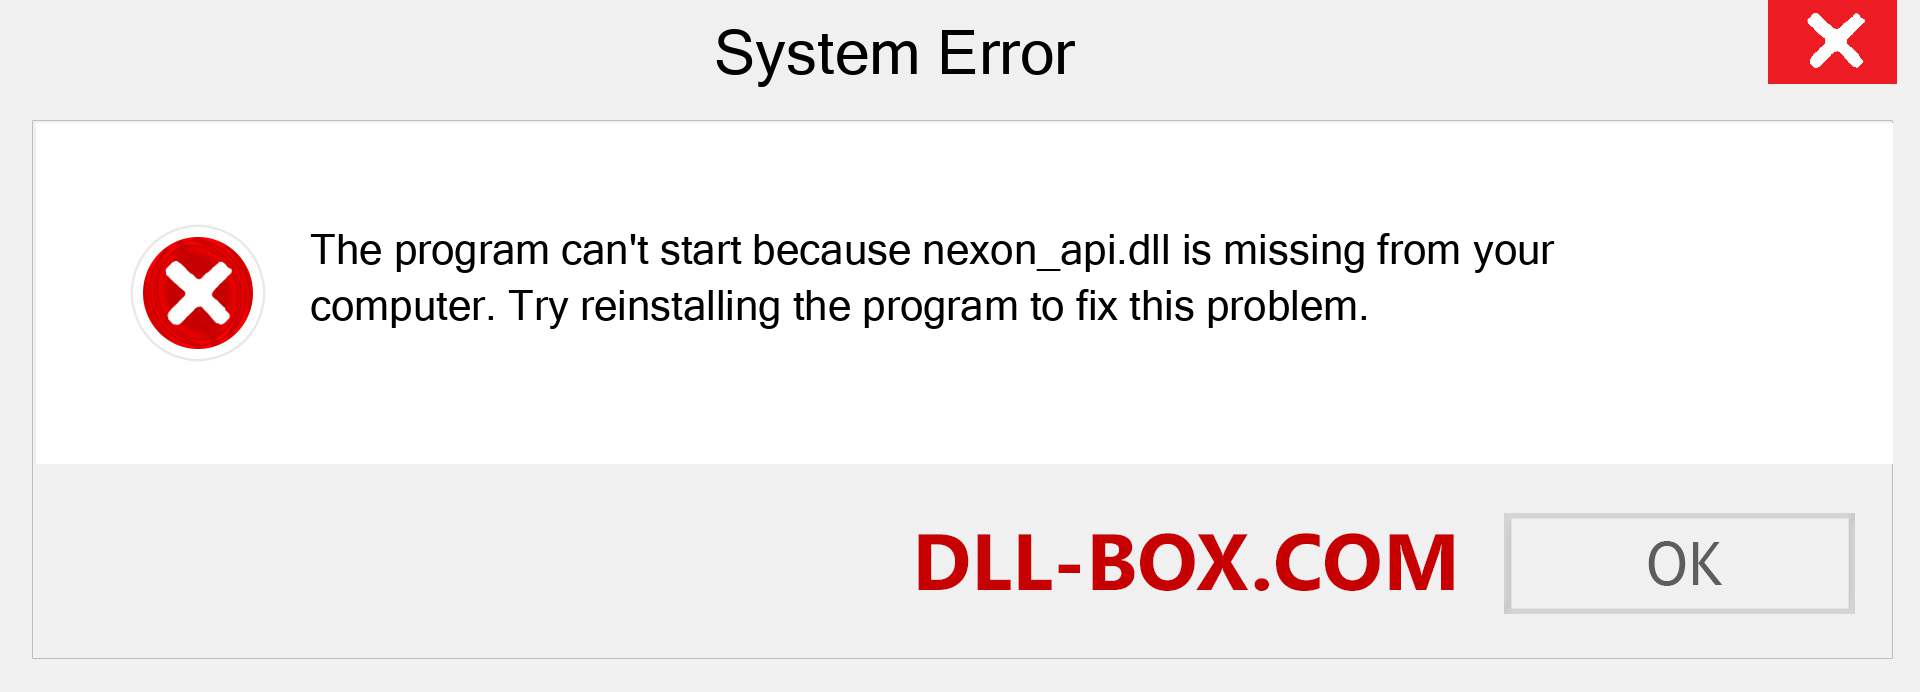  nexon_api.dll file is missing?. Download for Windows 7, 8, 10 - Fix  nexon_api dll Missing Error on Windows, photos, images